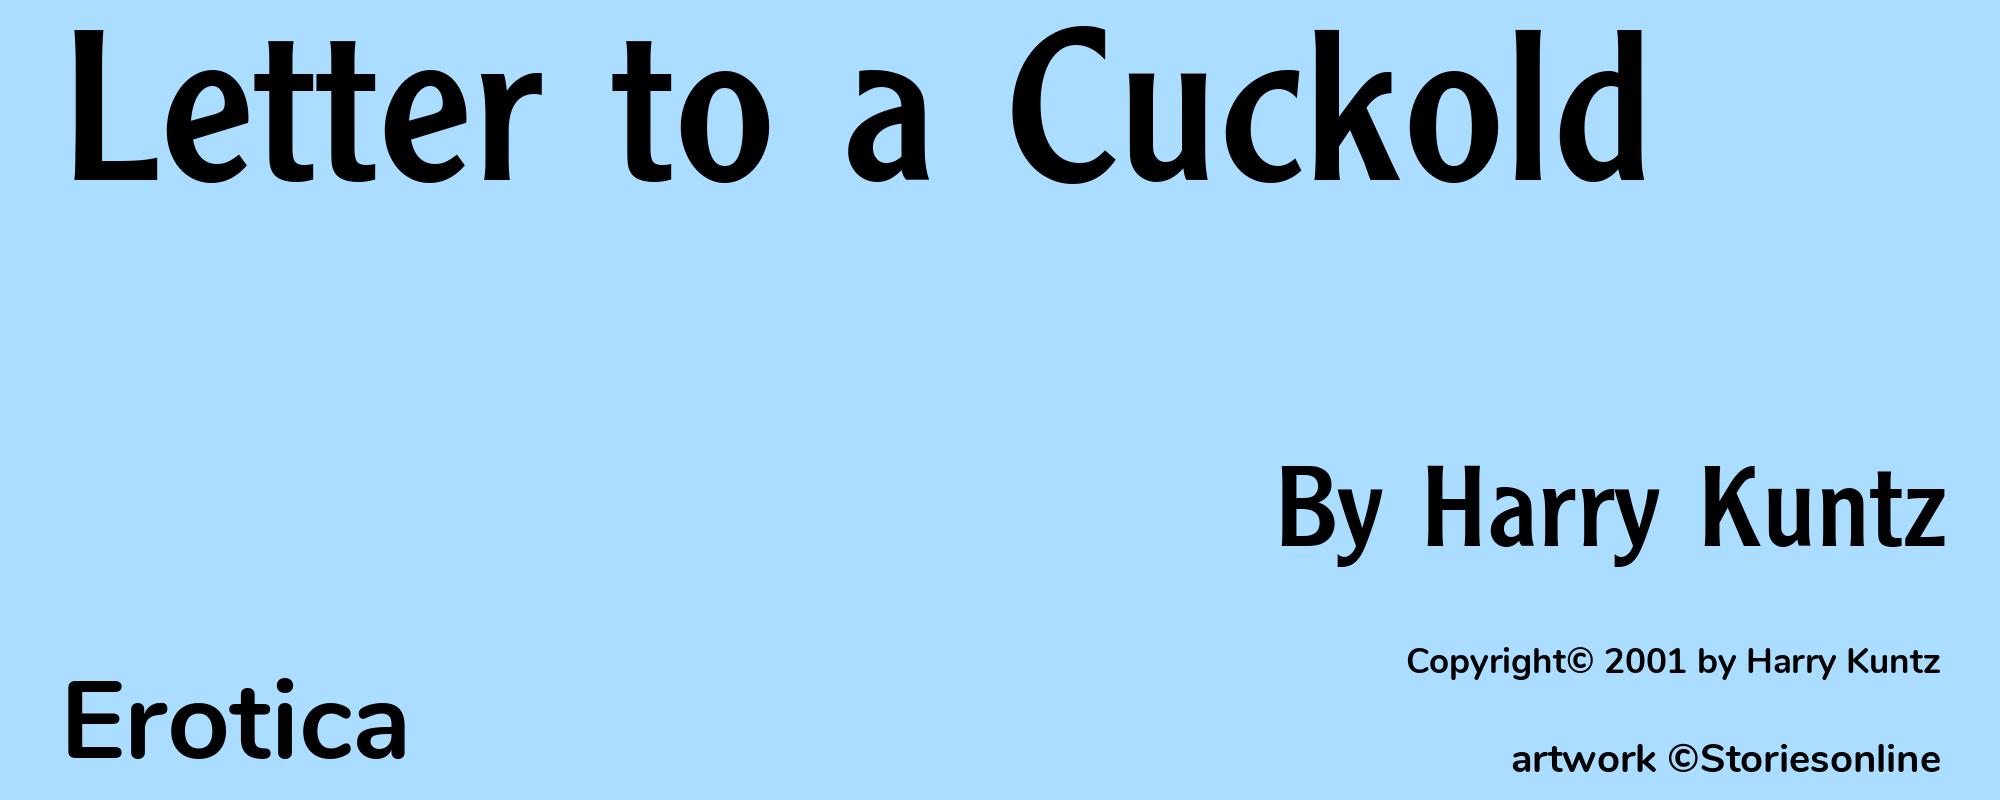 Letter to a Cuckold - Cover